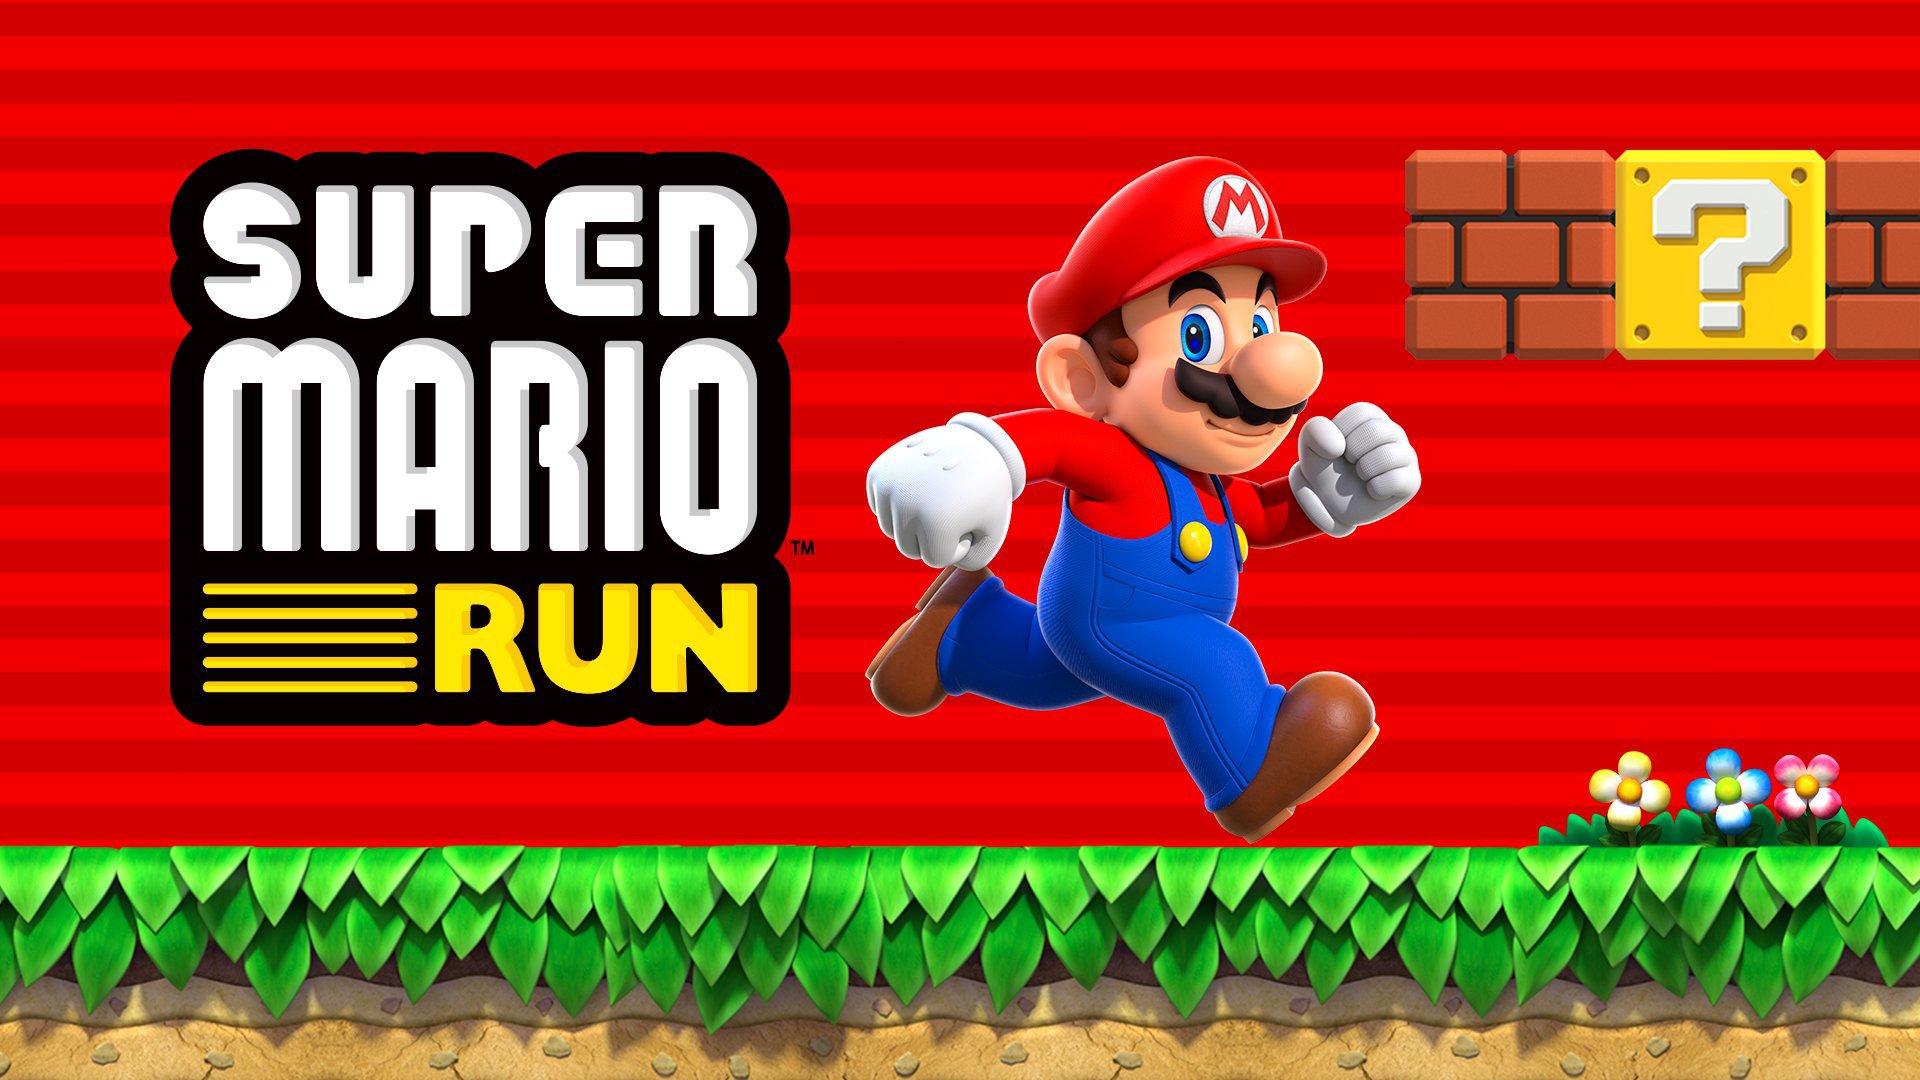 download super mario run apk on android before the official launch